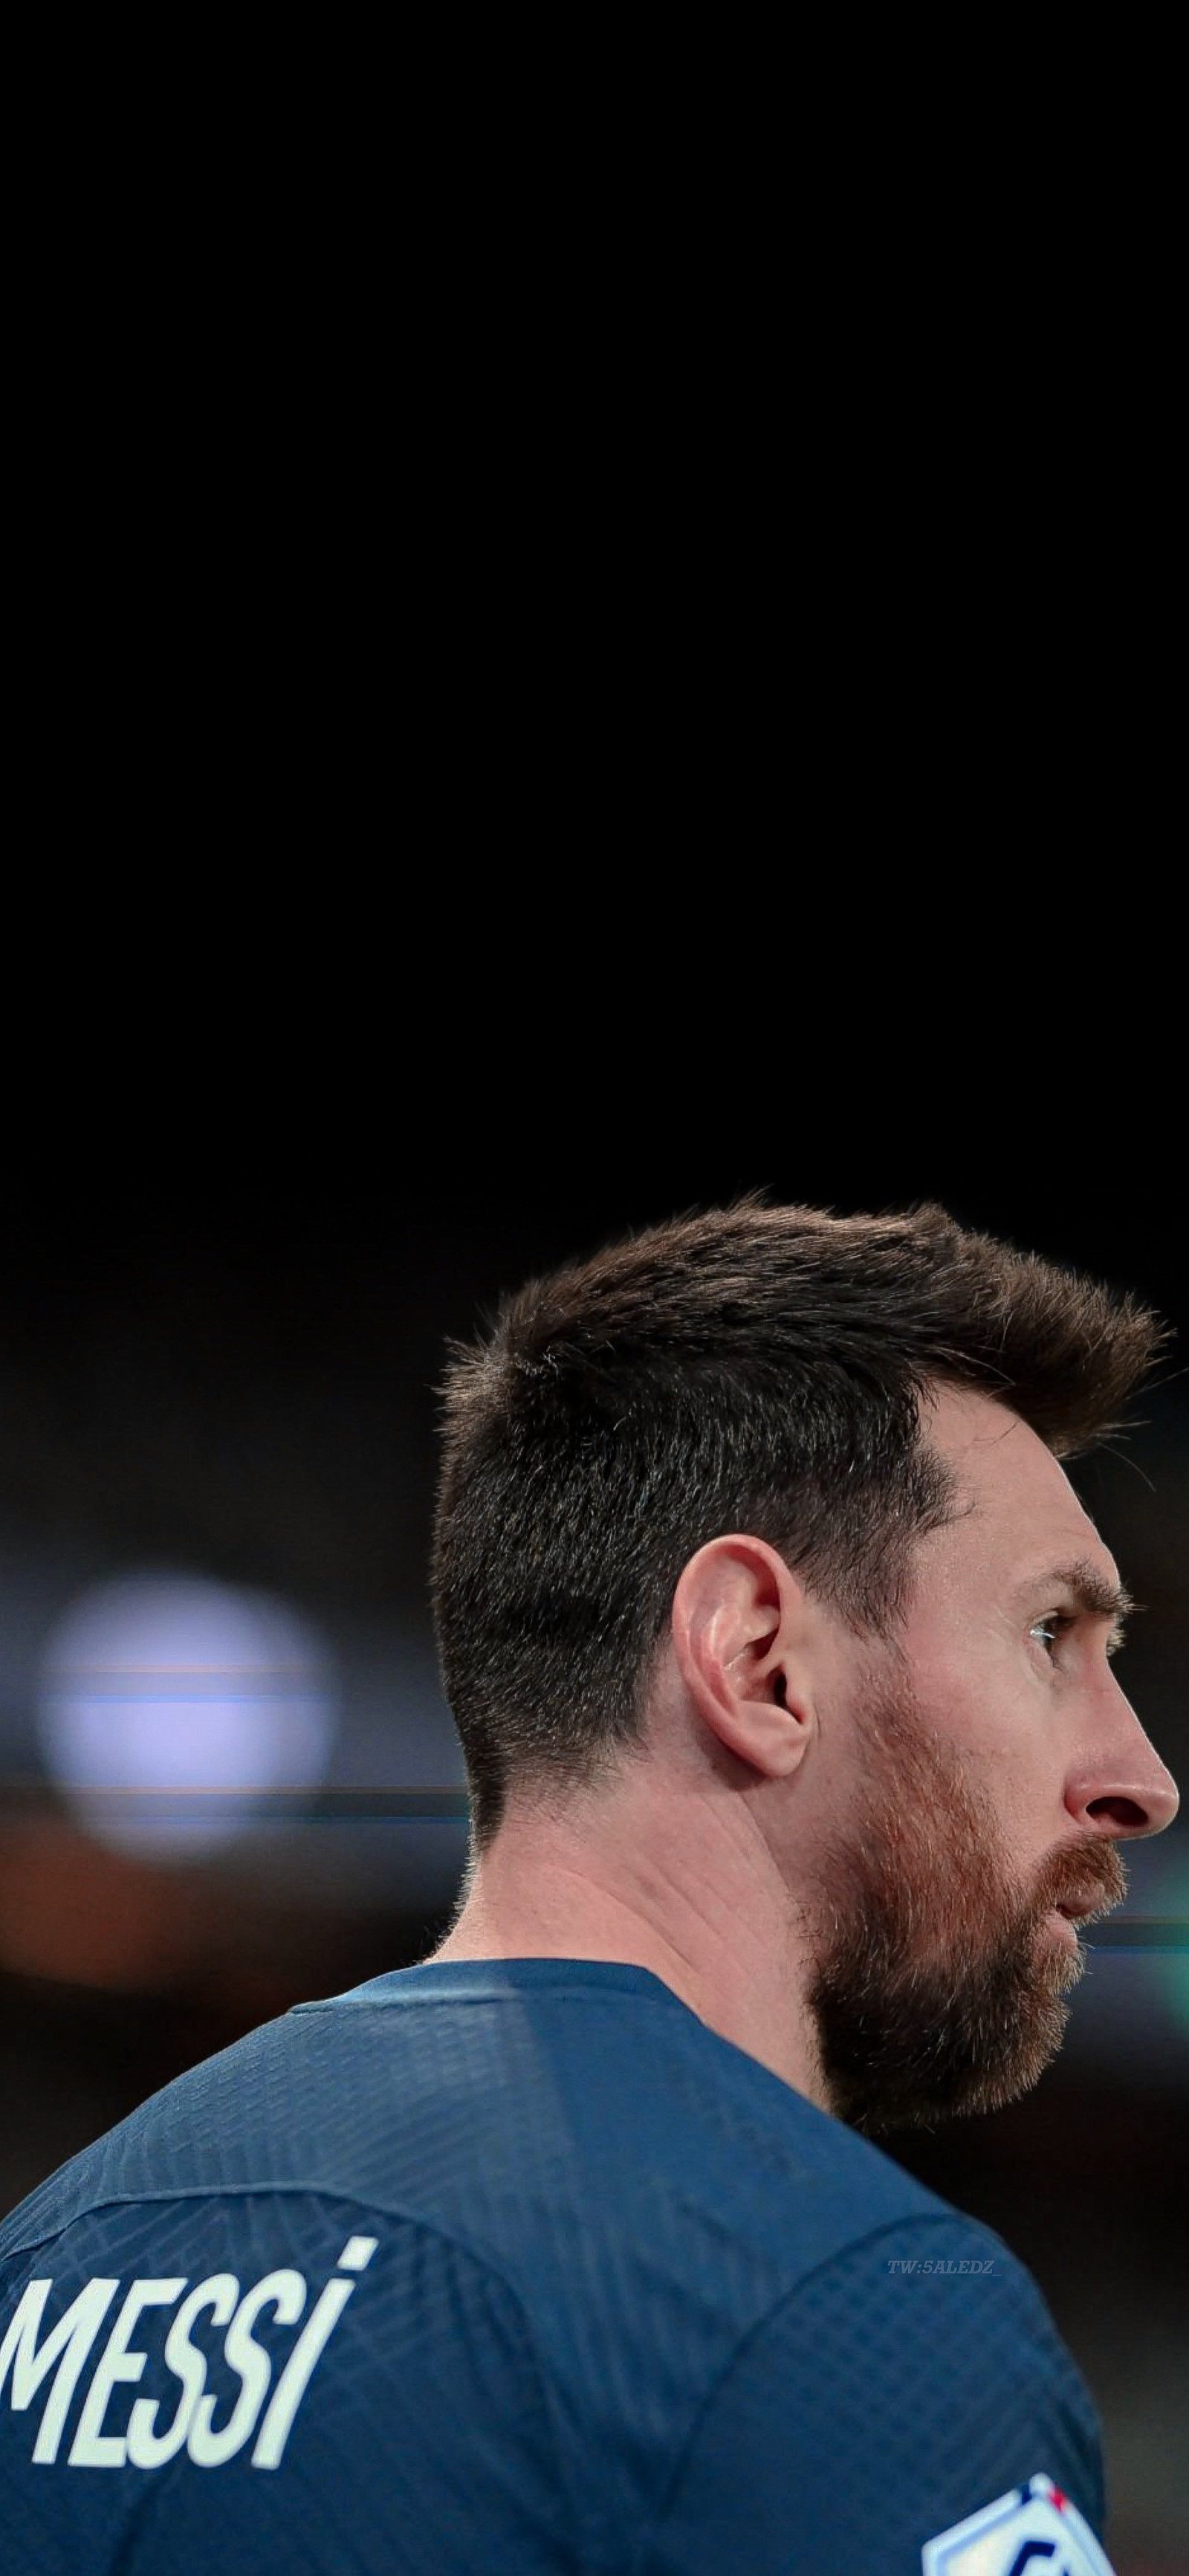 Messi Wallpaper For HD